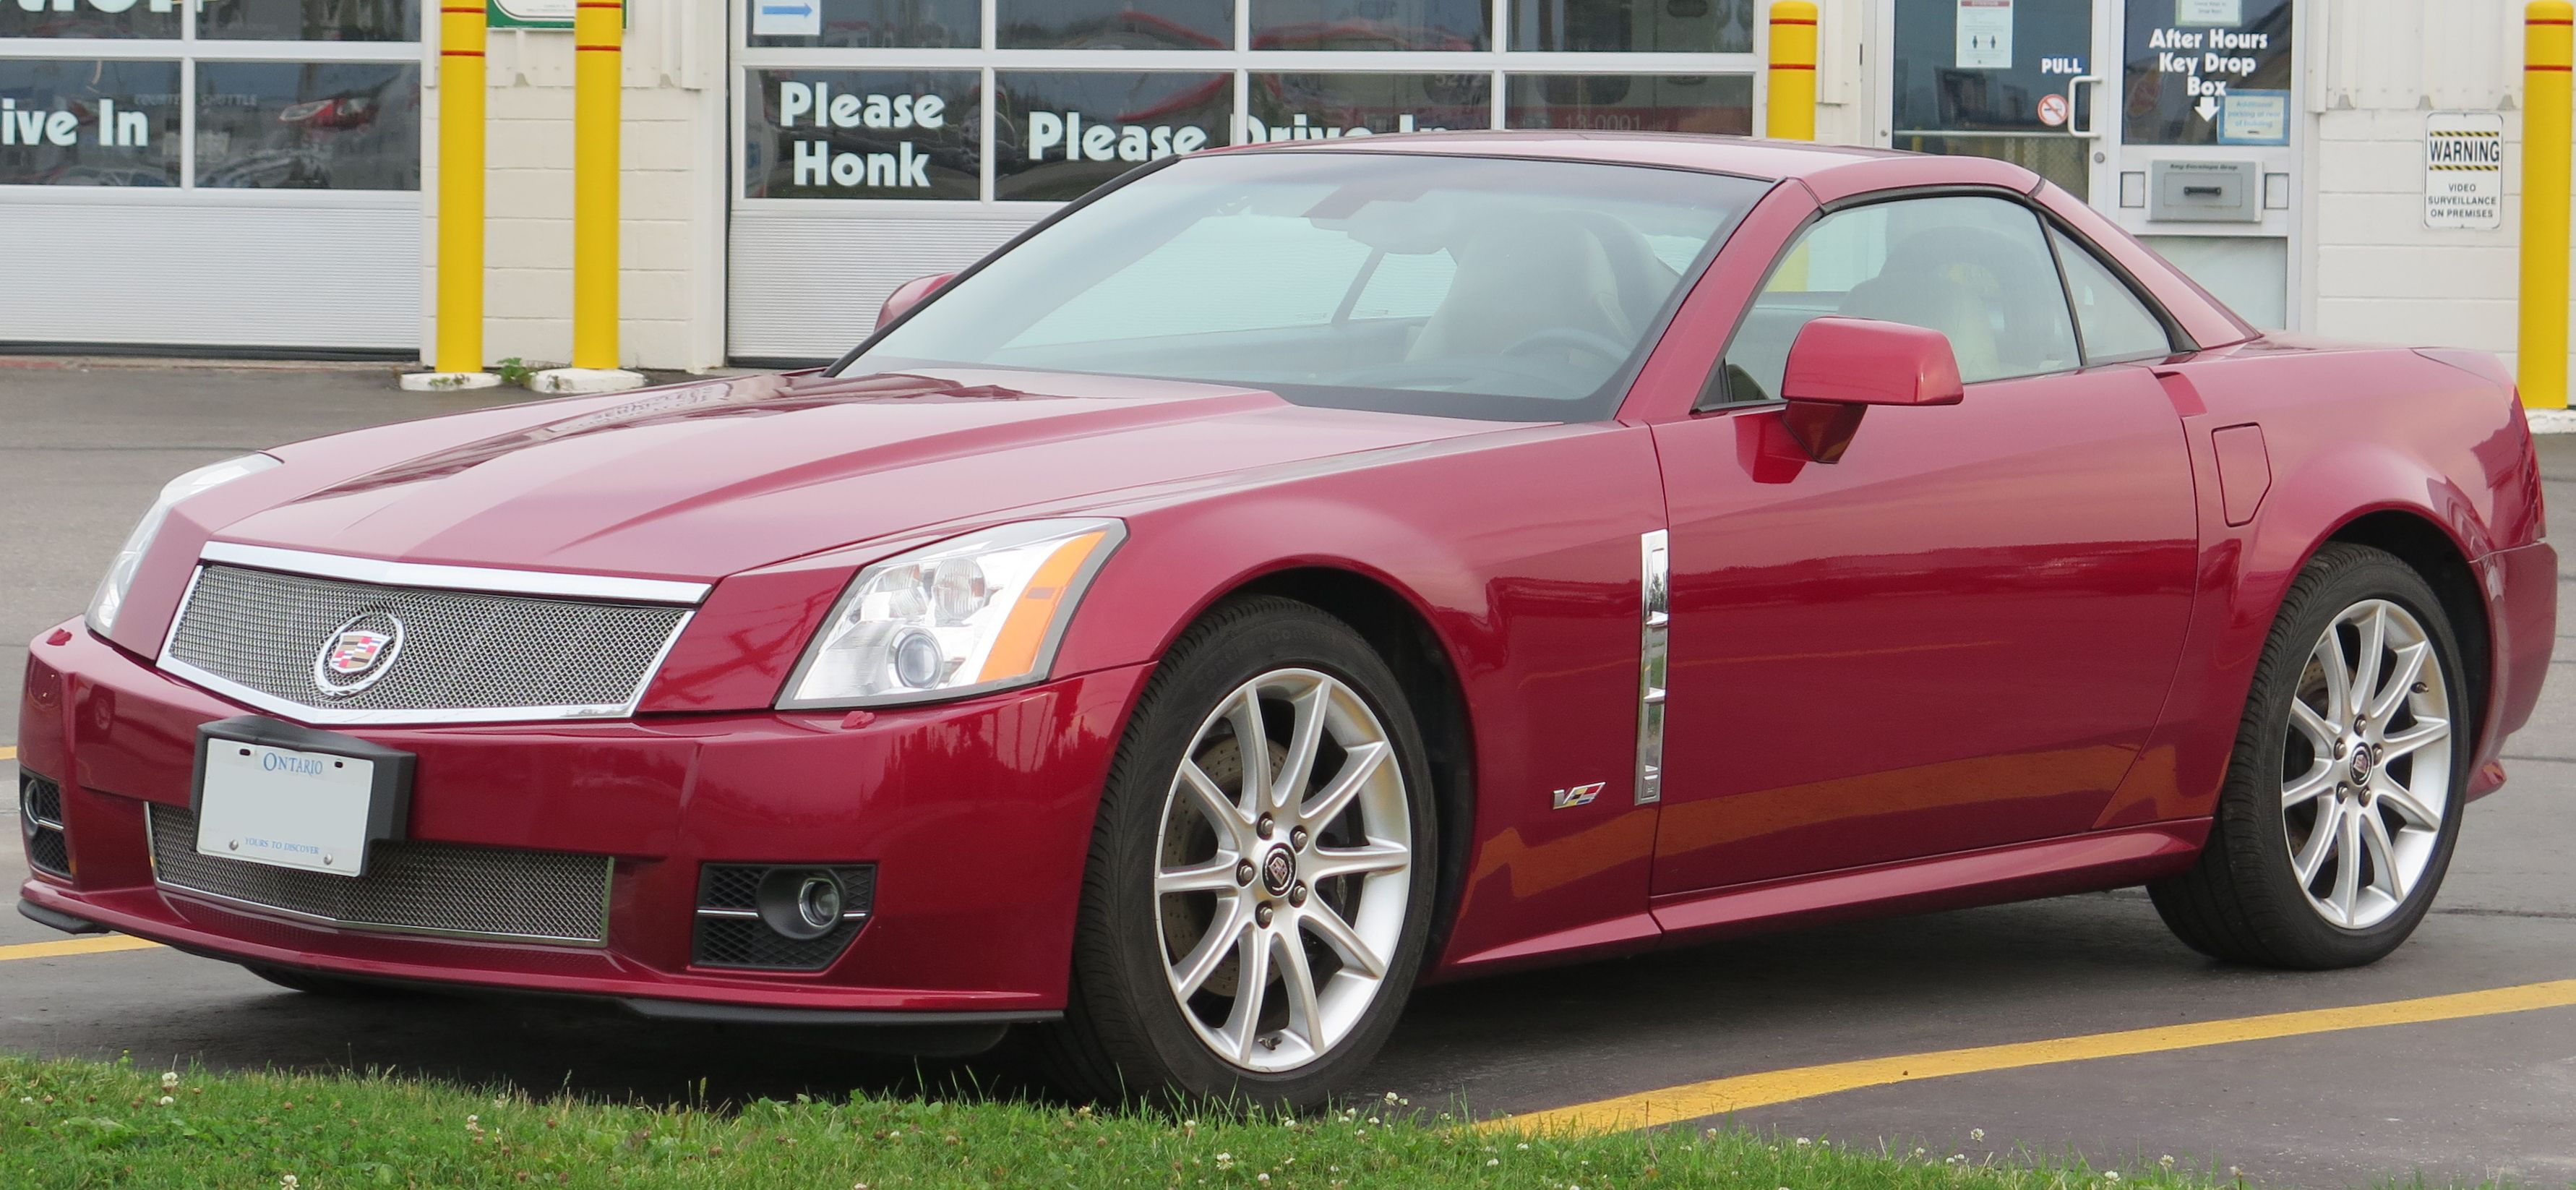 2009 Cadillac XLR-V red parked outside